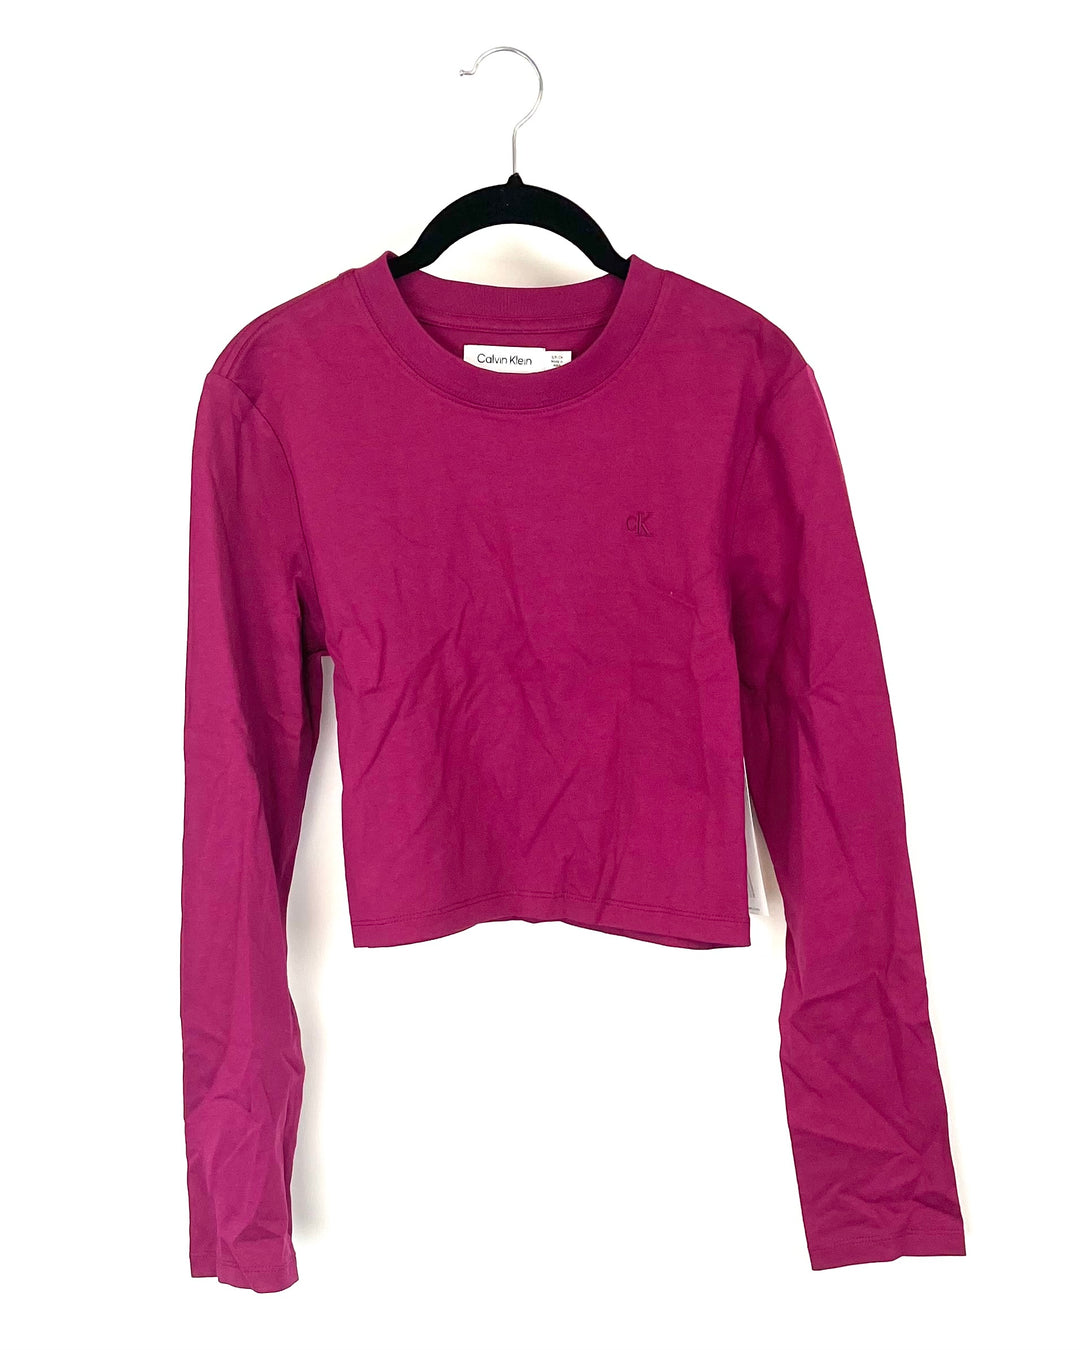 Magenta Cropped Long Sleeve Top - Small